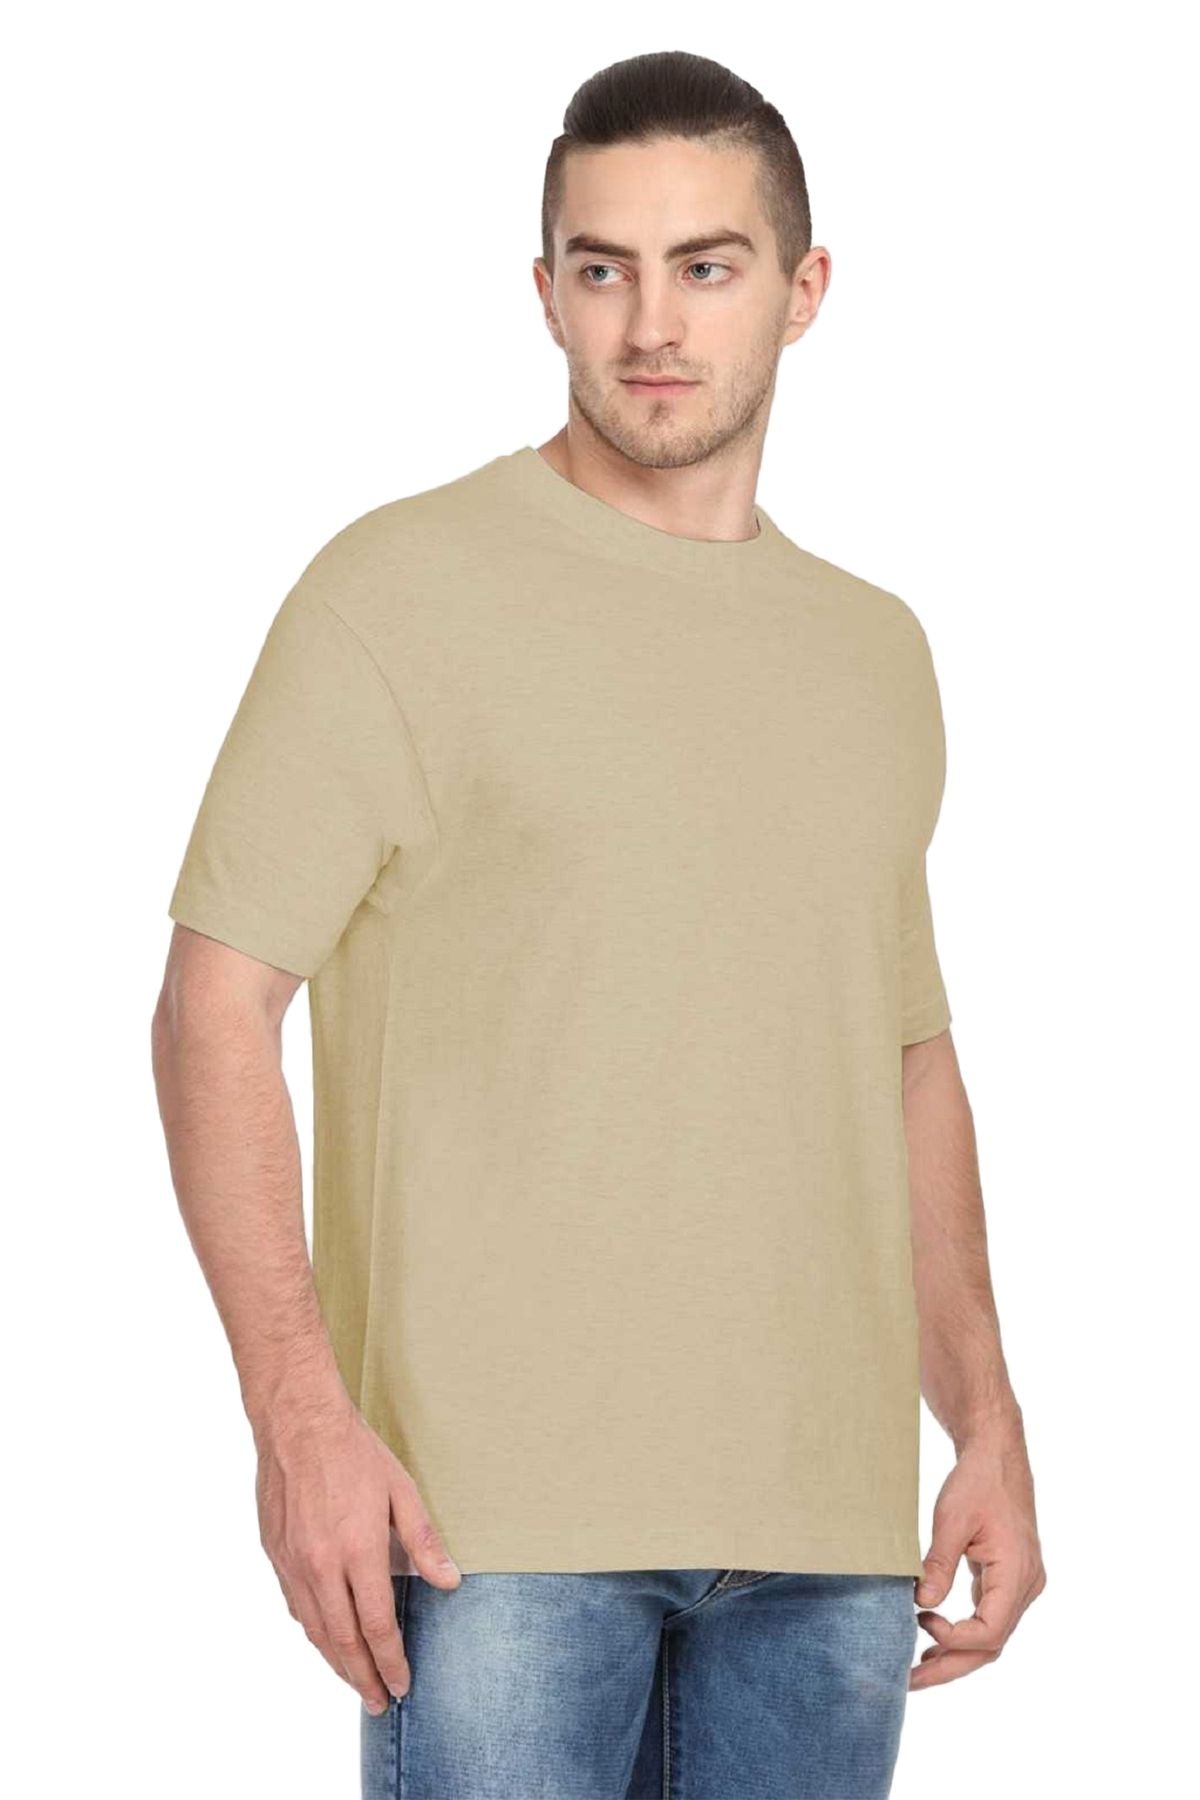 Multus  Mens Solid Round Neck Polyester White T-shirt Pack Of 2  Brown  White